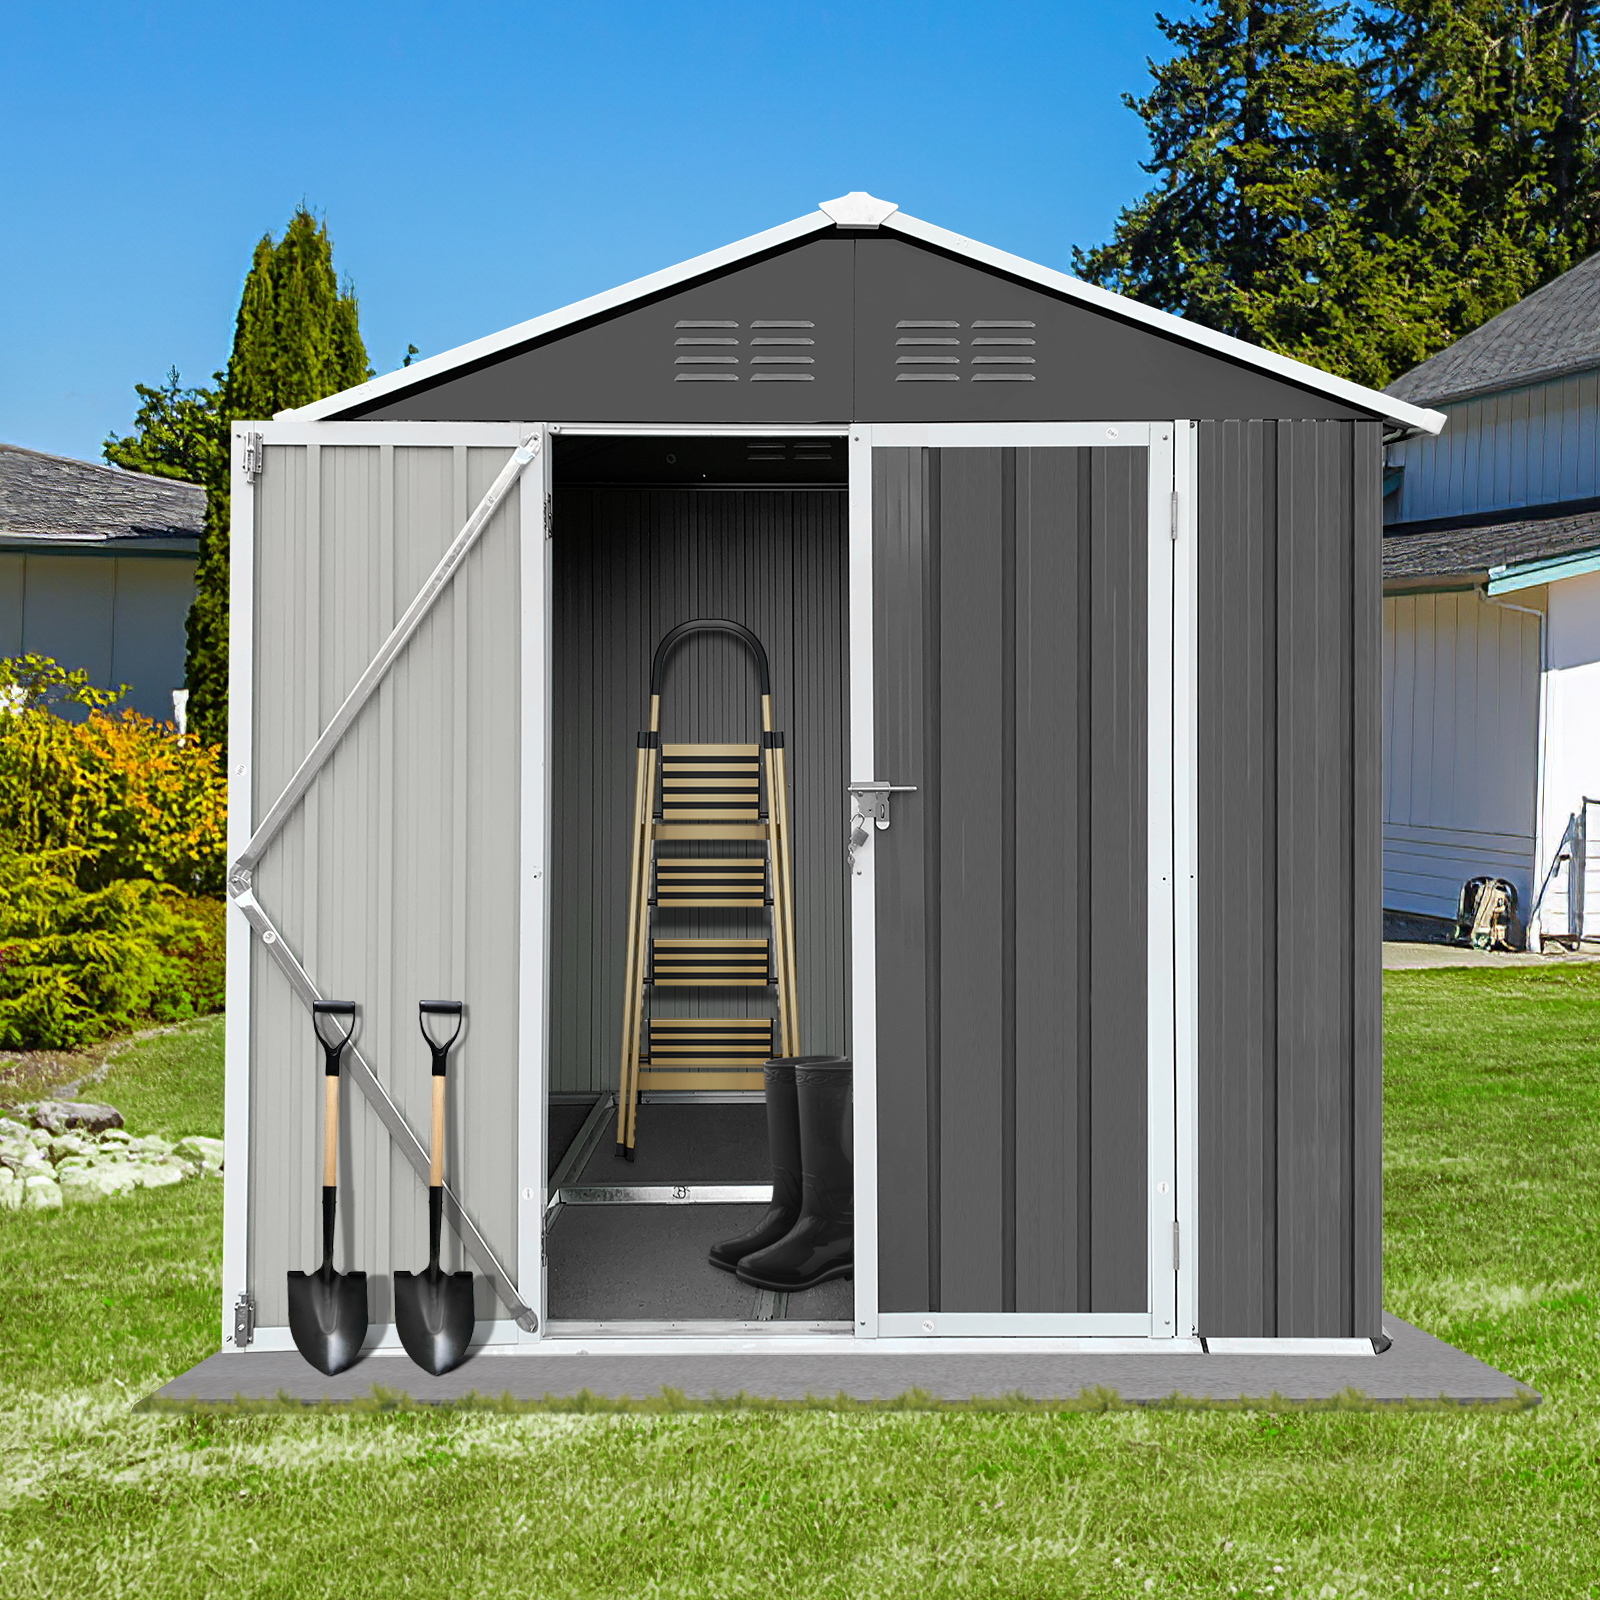 6' x 4' Outdoor Metal Storage Shed, Tools Storage Shed, Galvanized Steel Garden Shed with Lockable Doors, Outdoor Storage Shed for Backyard, Patio, Lawn, D8311 - image 2 of 9